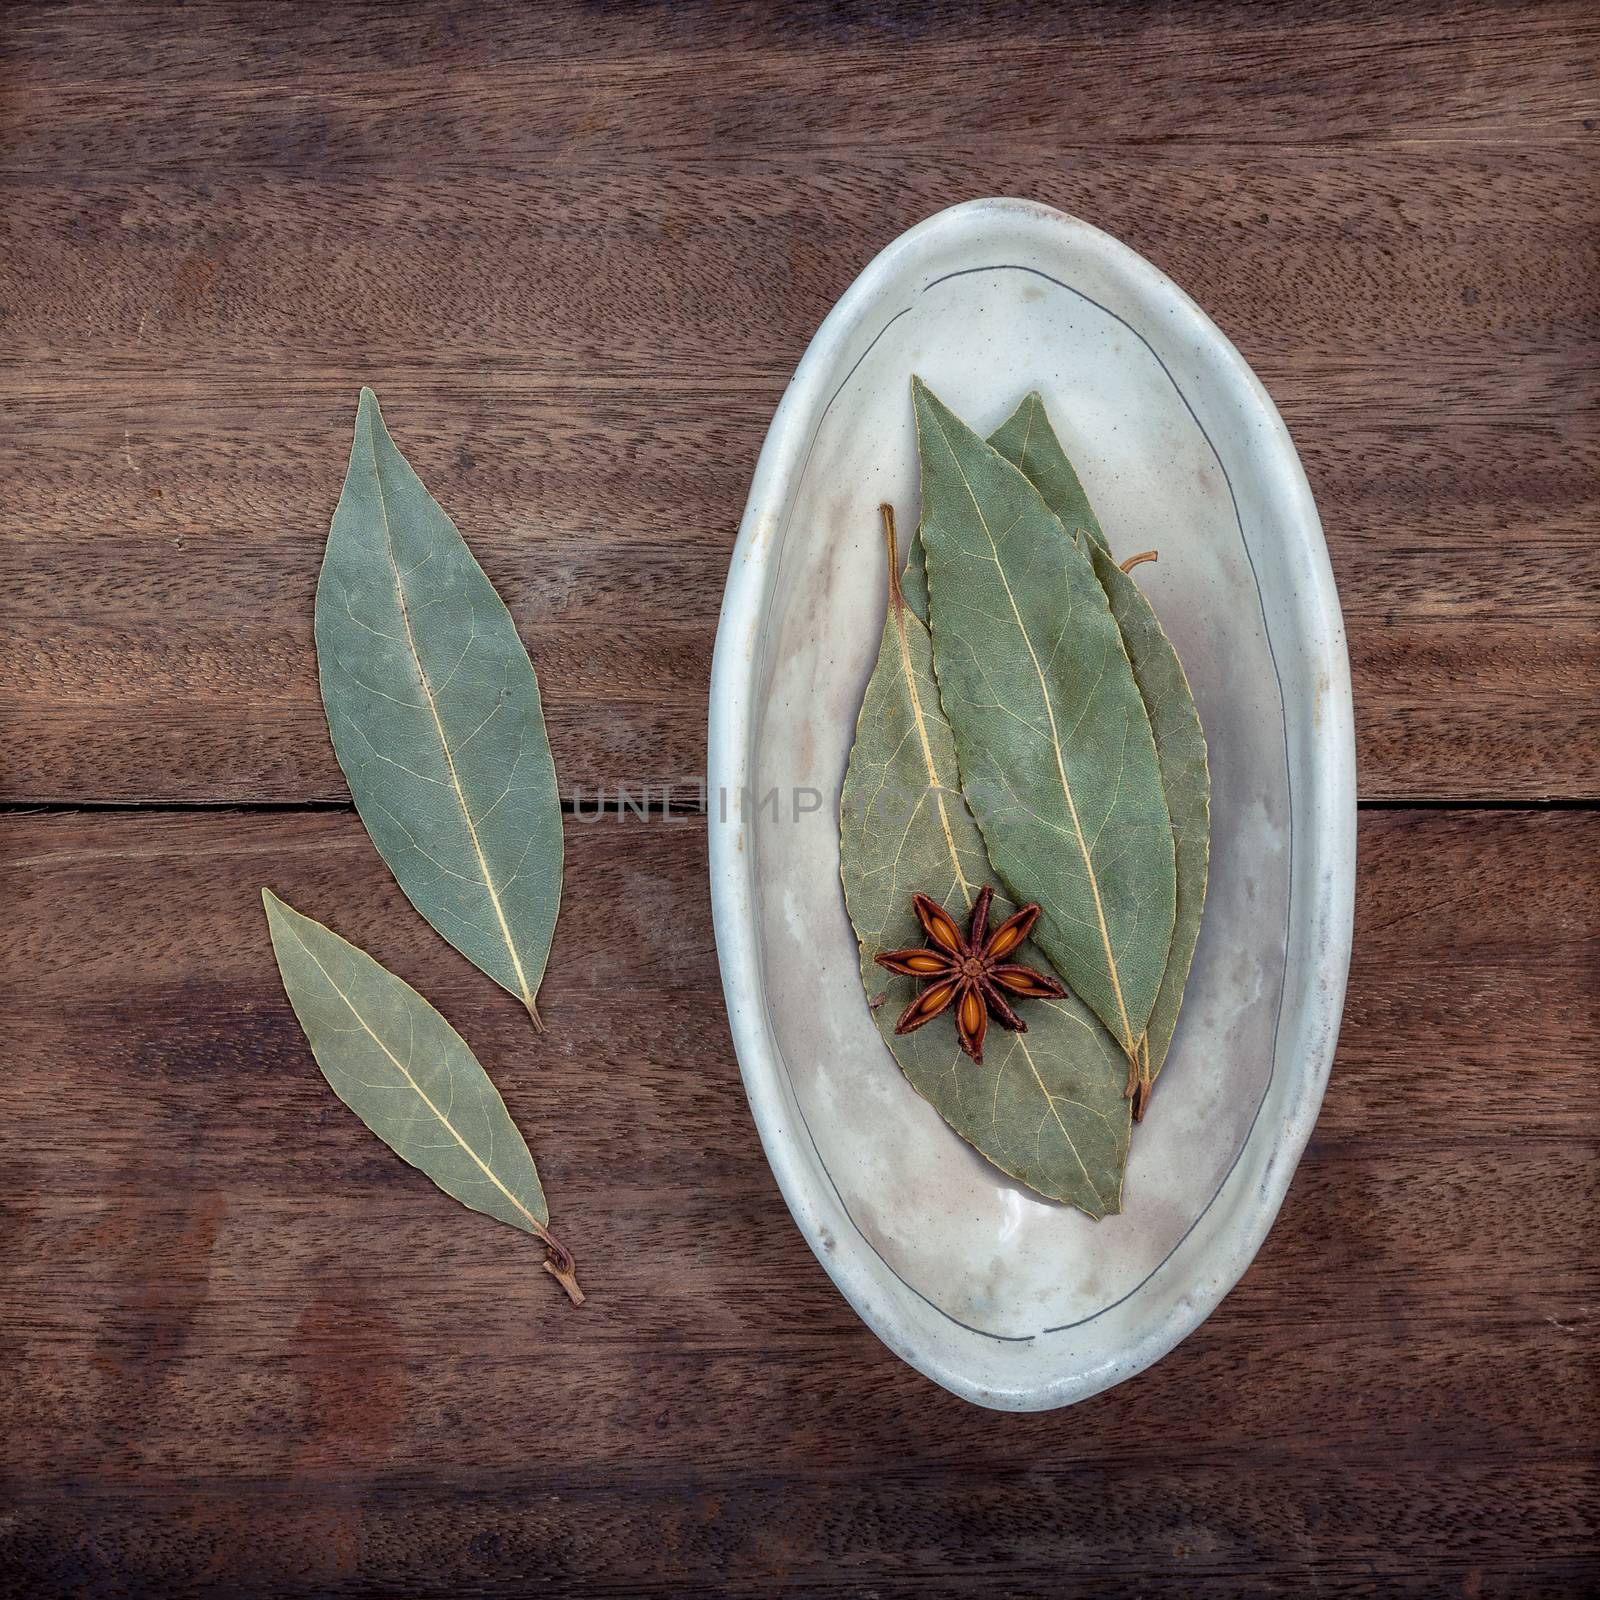 The Bowl of dried bay leaves on old wooden background. by kerdkanno